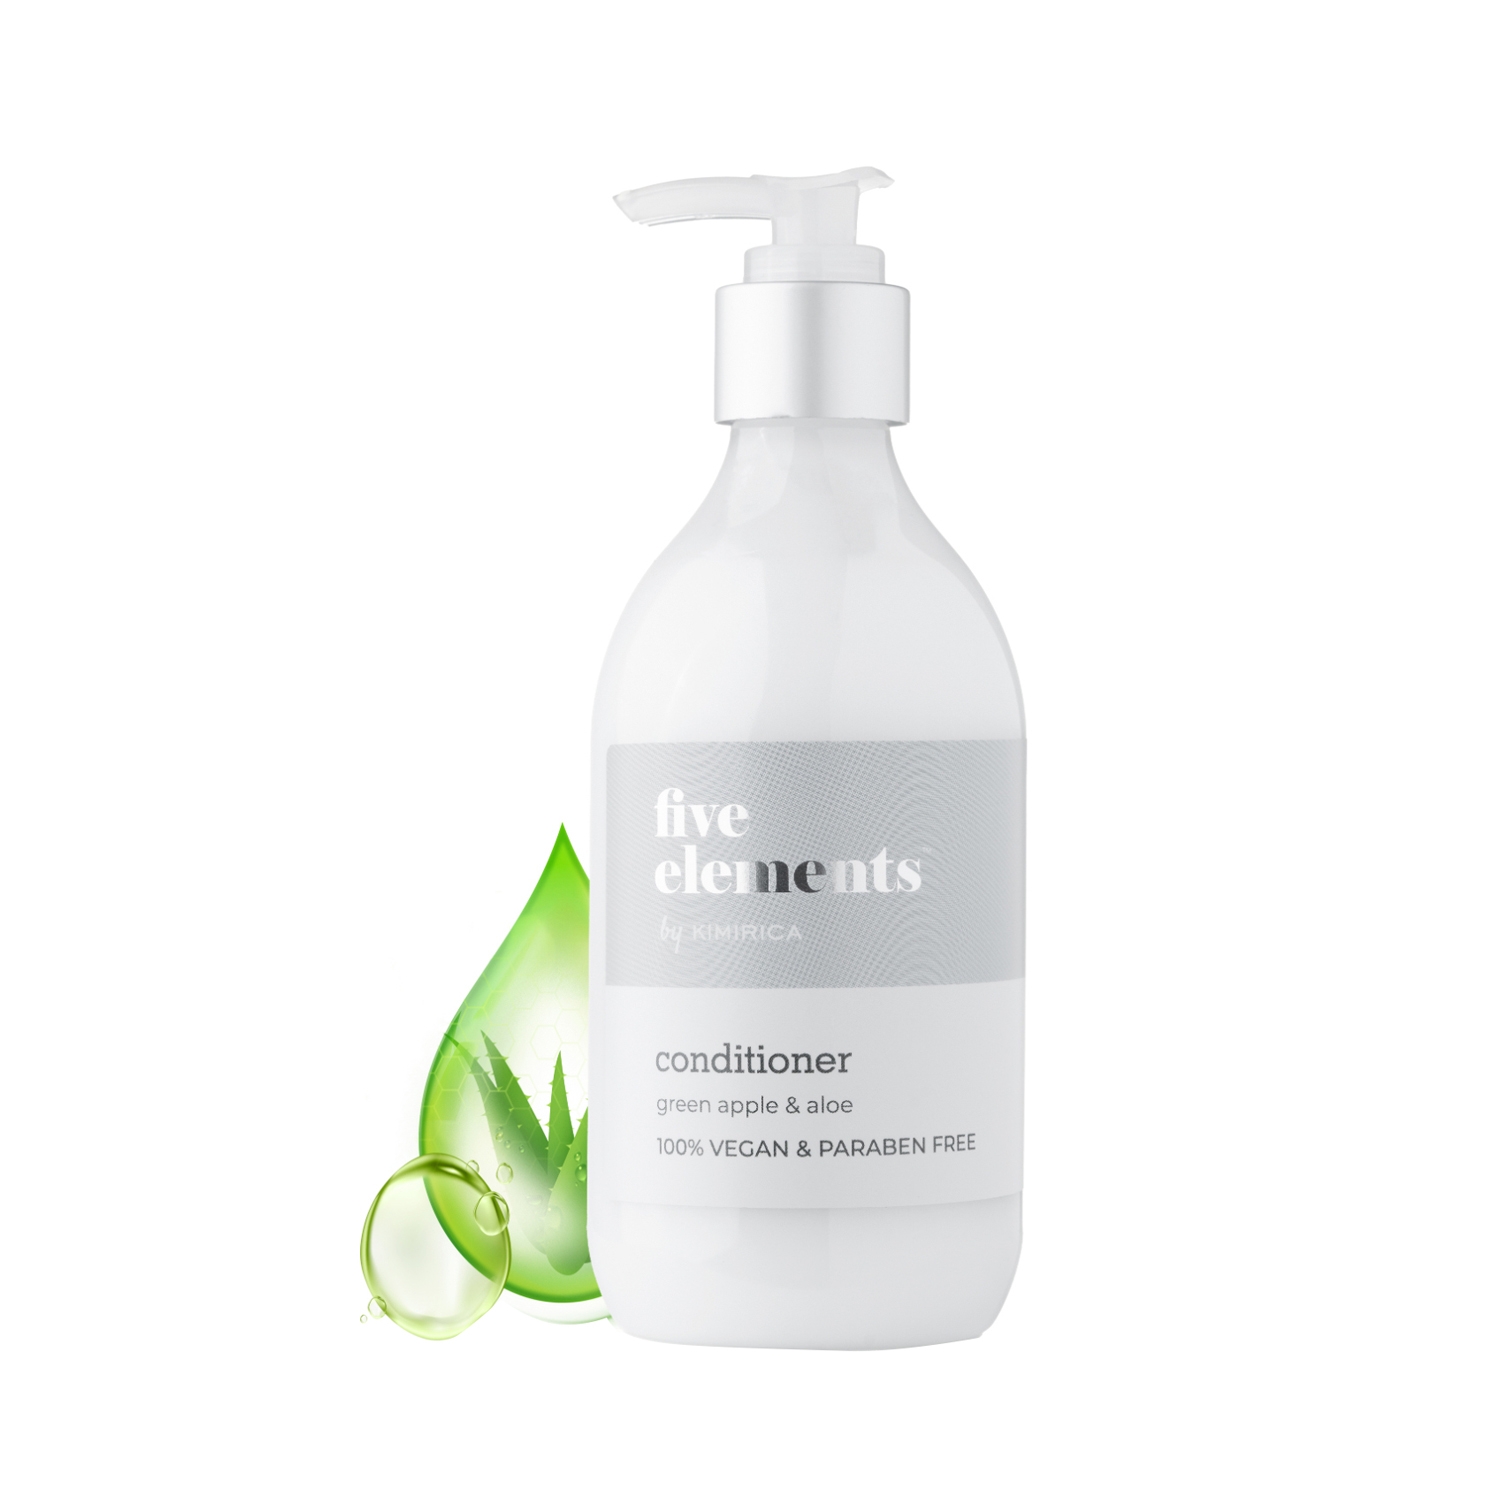 Kimirica | Kimirica Five Elements Green Apple & Aloe Conditioner for Soft & Smooth Hair SLS Free (300 ml)